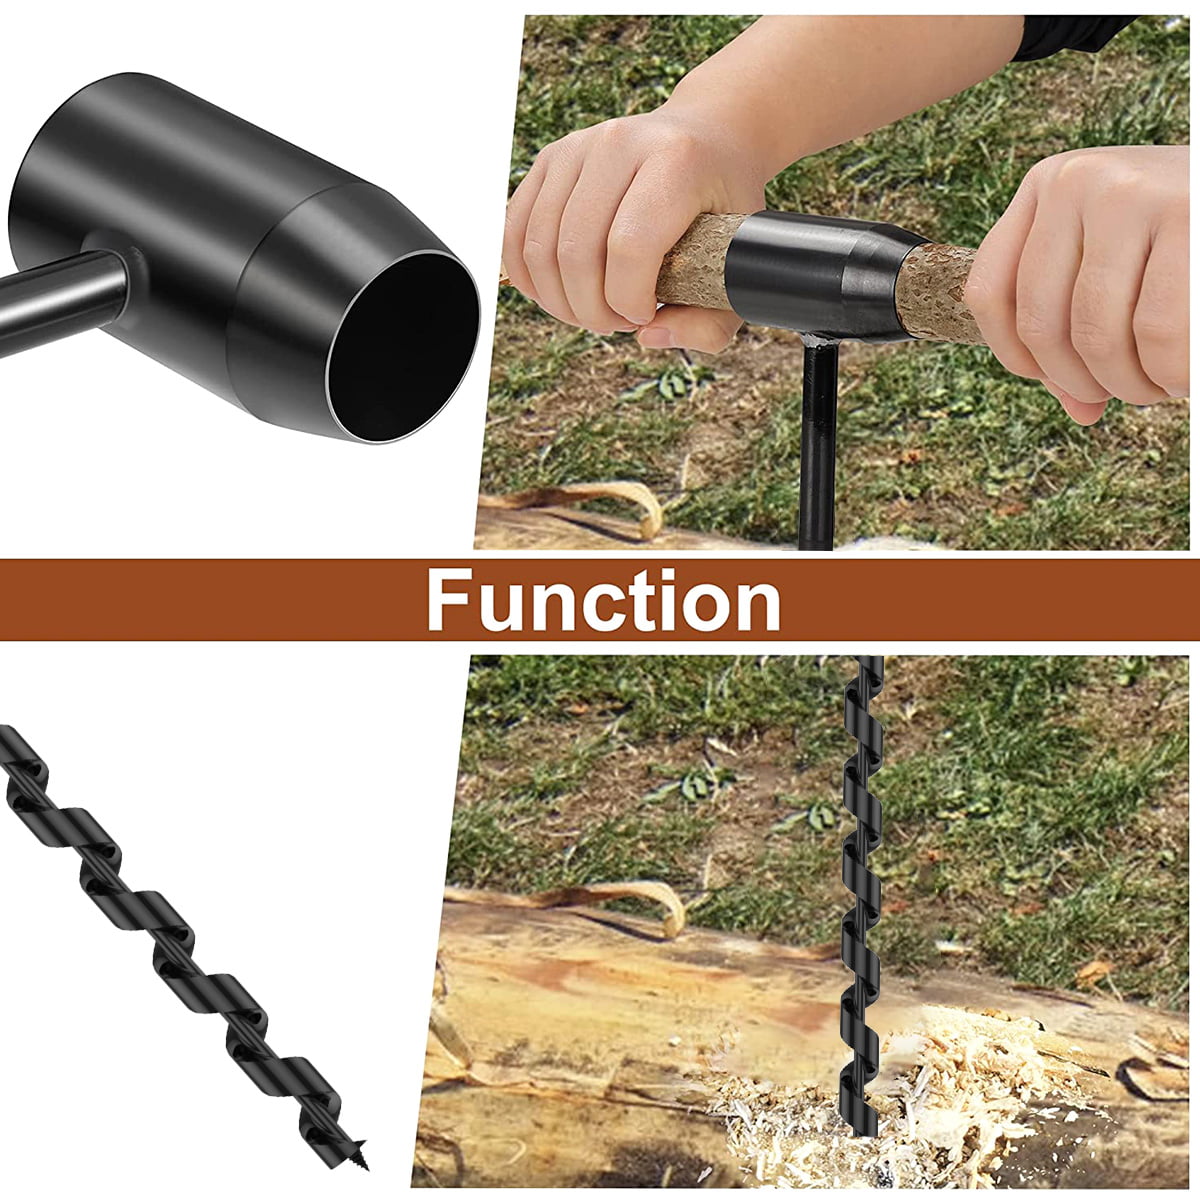 1 Set Manual Hand Drill Puncher [Punching Artifact]Hand Drill Twist Drill  Hand Auger For Woodworking Model Diy Woodworking With Drilling Bit